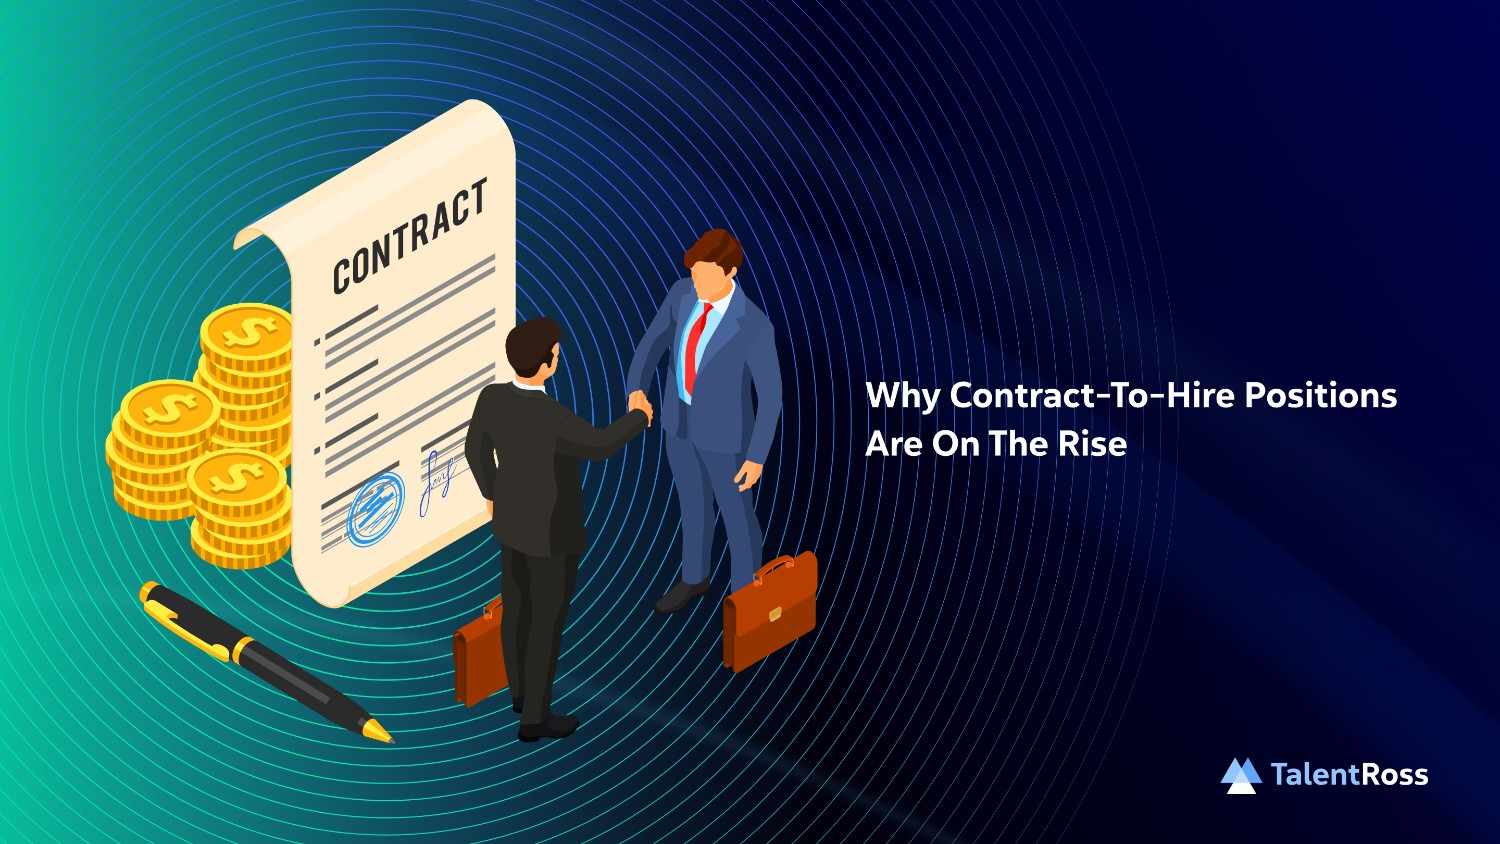 Why Contract-To-Hire Positions Are On The Rise